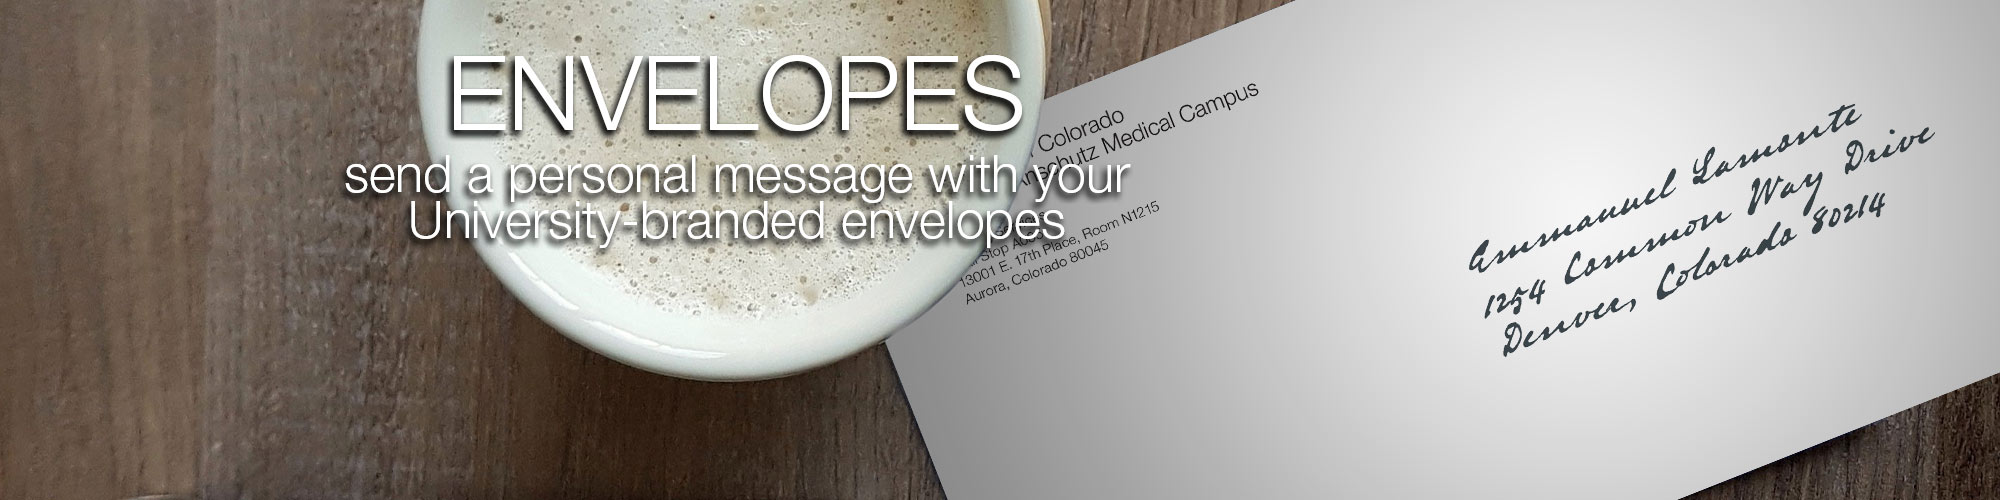 Envelopes: send a personal message with your University-branded envelopes